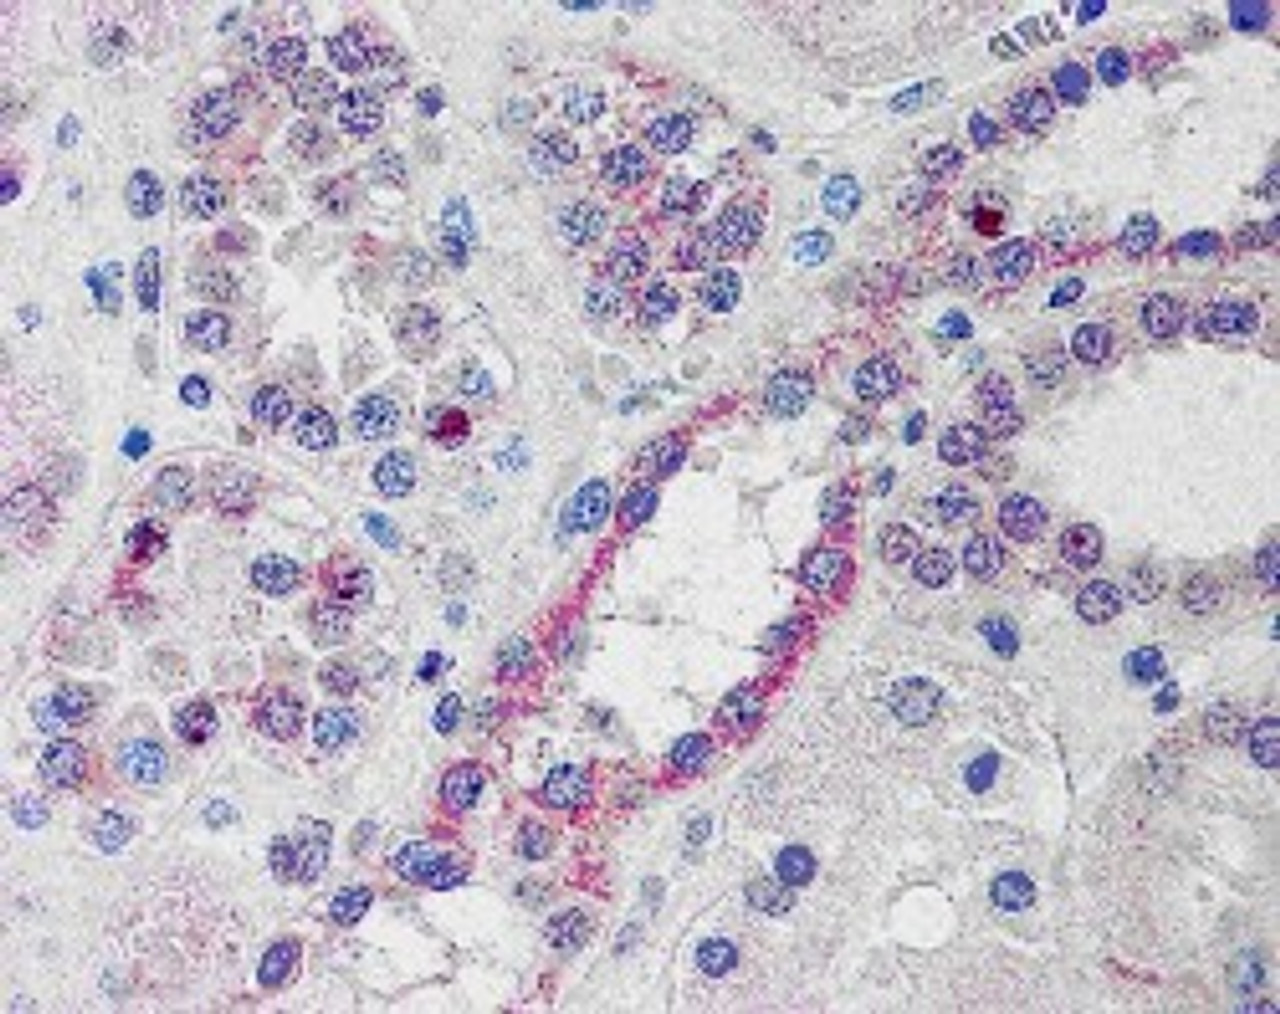 45-979 (10ug/ml) staining of paraffin embedded Human Kidney. Steamed antigen retrieval with citrate buffer pH 6, AP-staining.